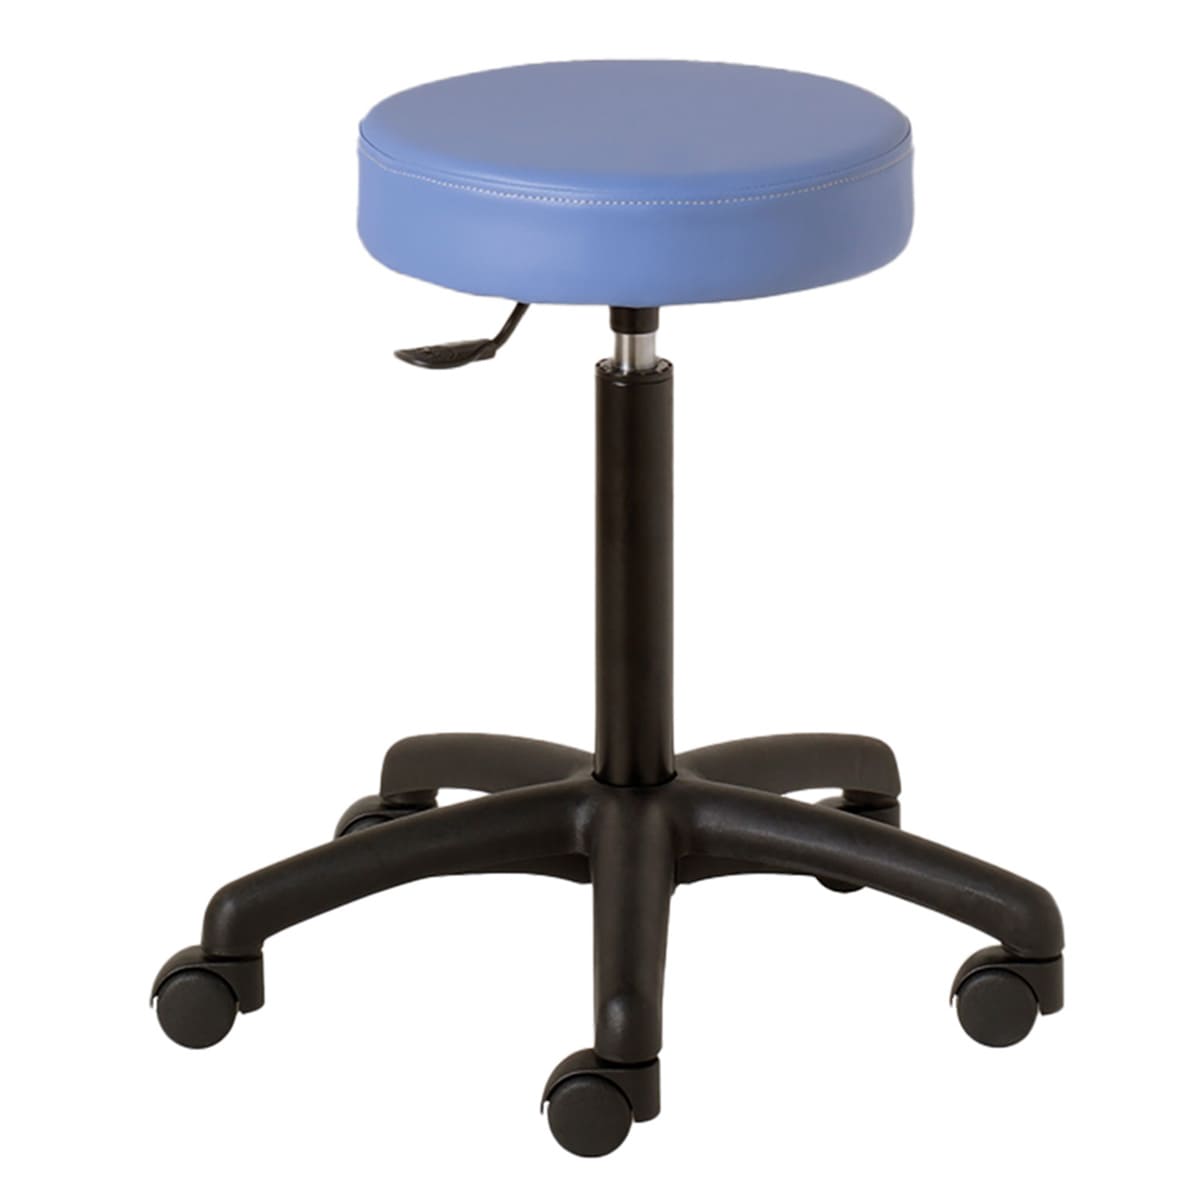 Stool with round seat, black ABS base